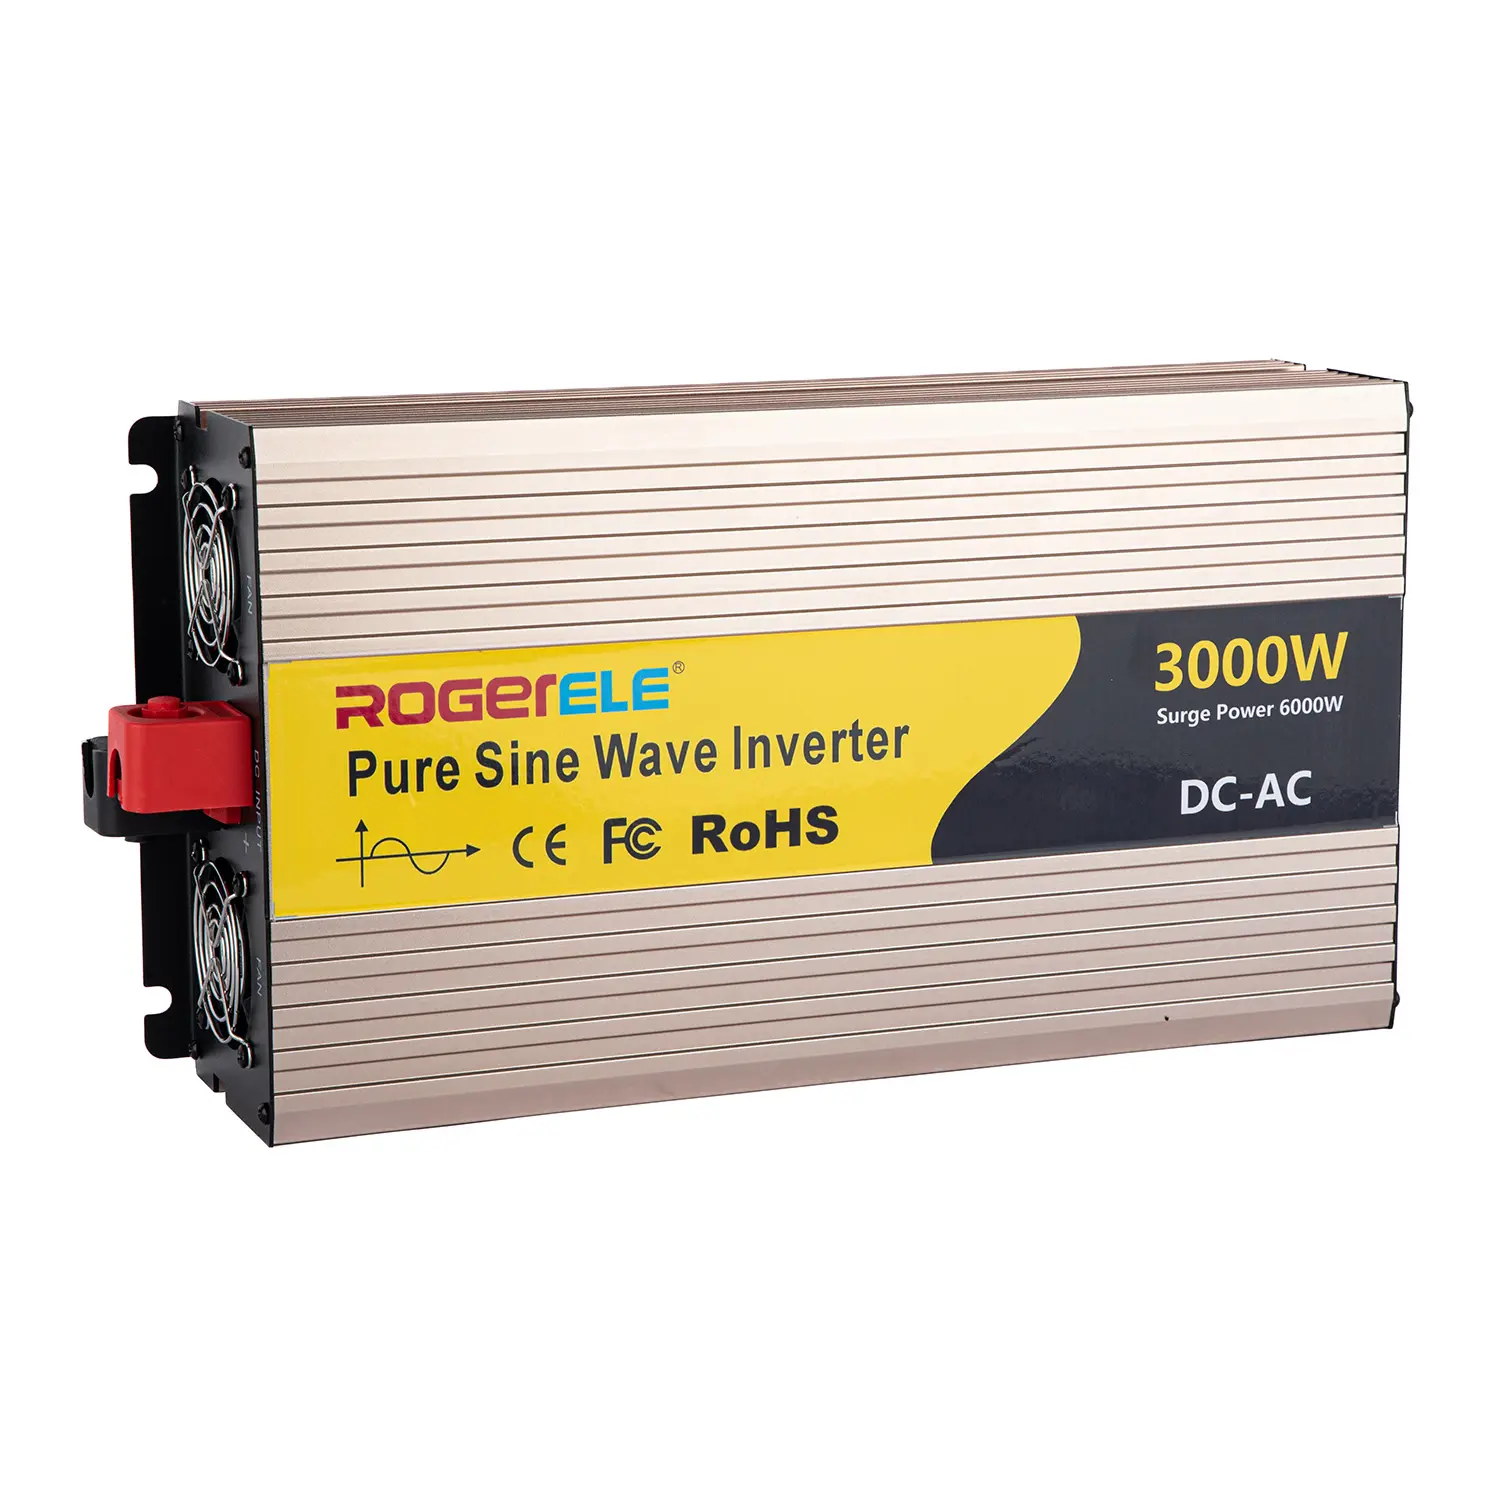 DC to AC Inverter 3000W 4000W 5000W Pure Sine Wave Inverter AC Converter for Home, Truck, Outdoor